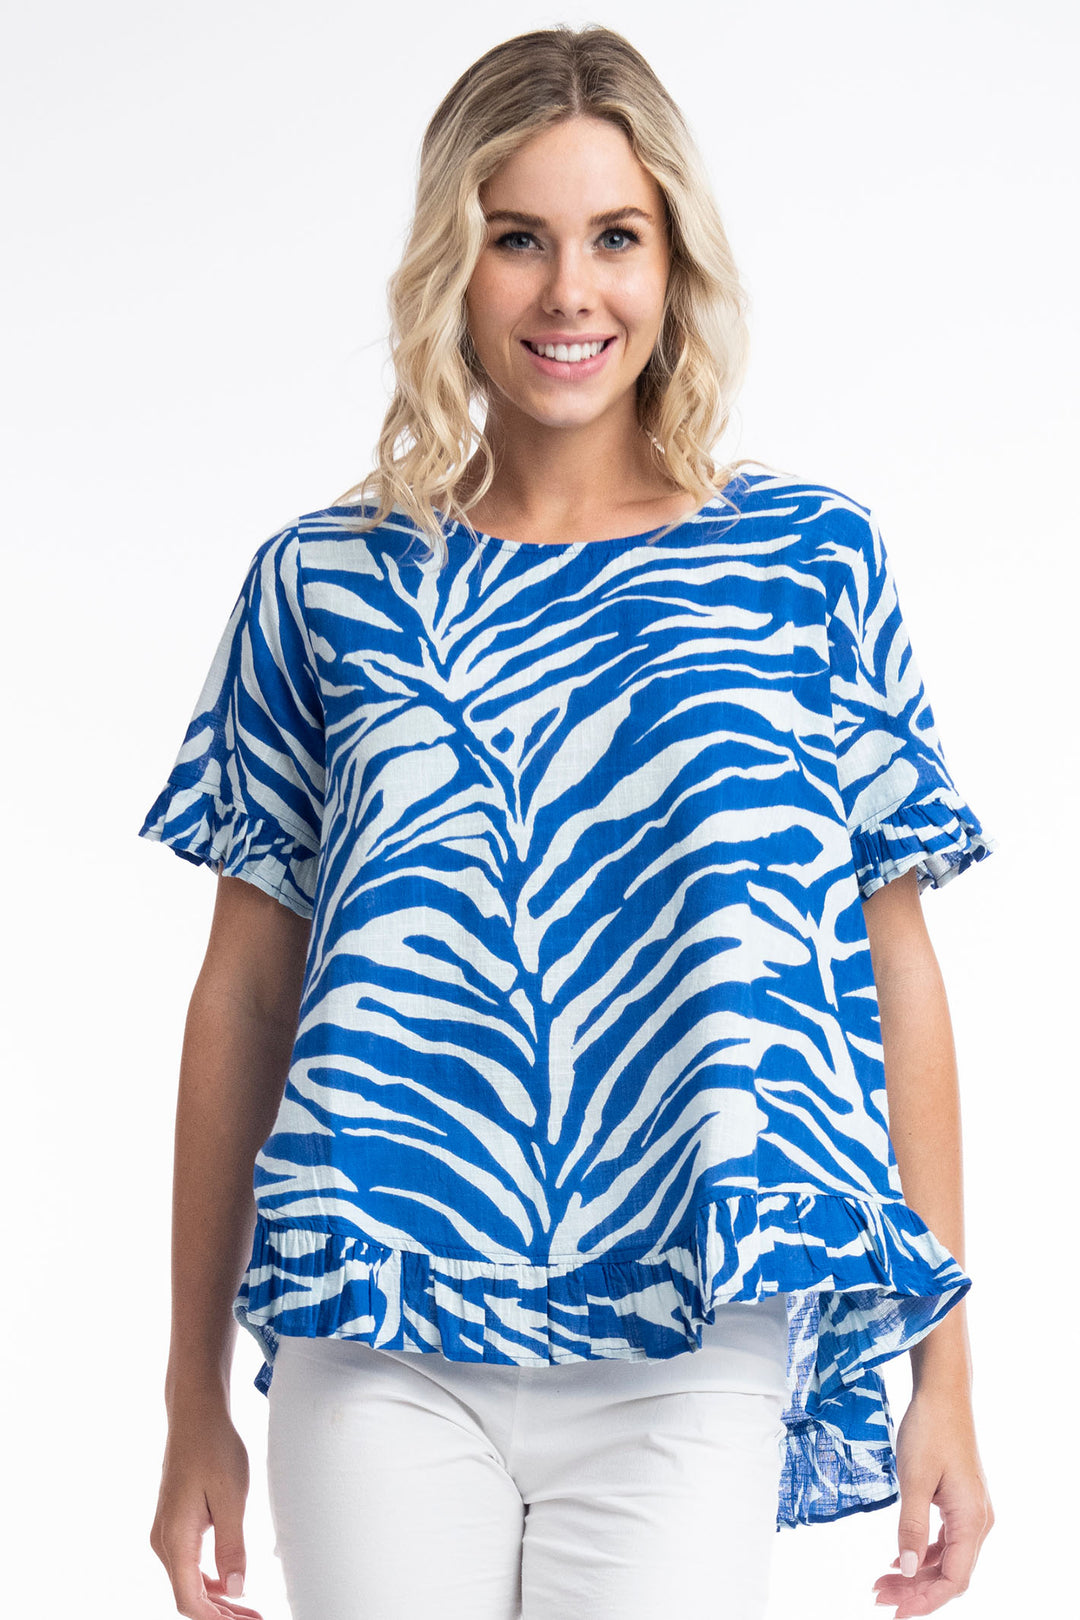 Orientique O62605 Salamis Blue Print Short Sleeve Frill Top - Experience Boutique